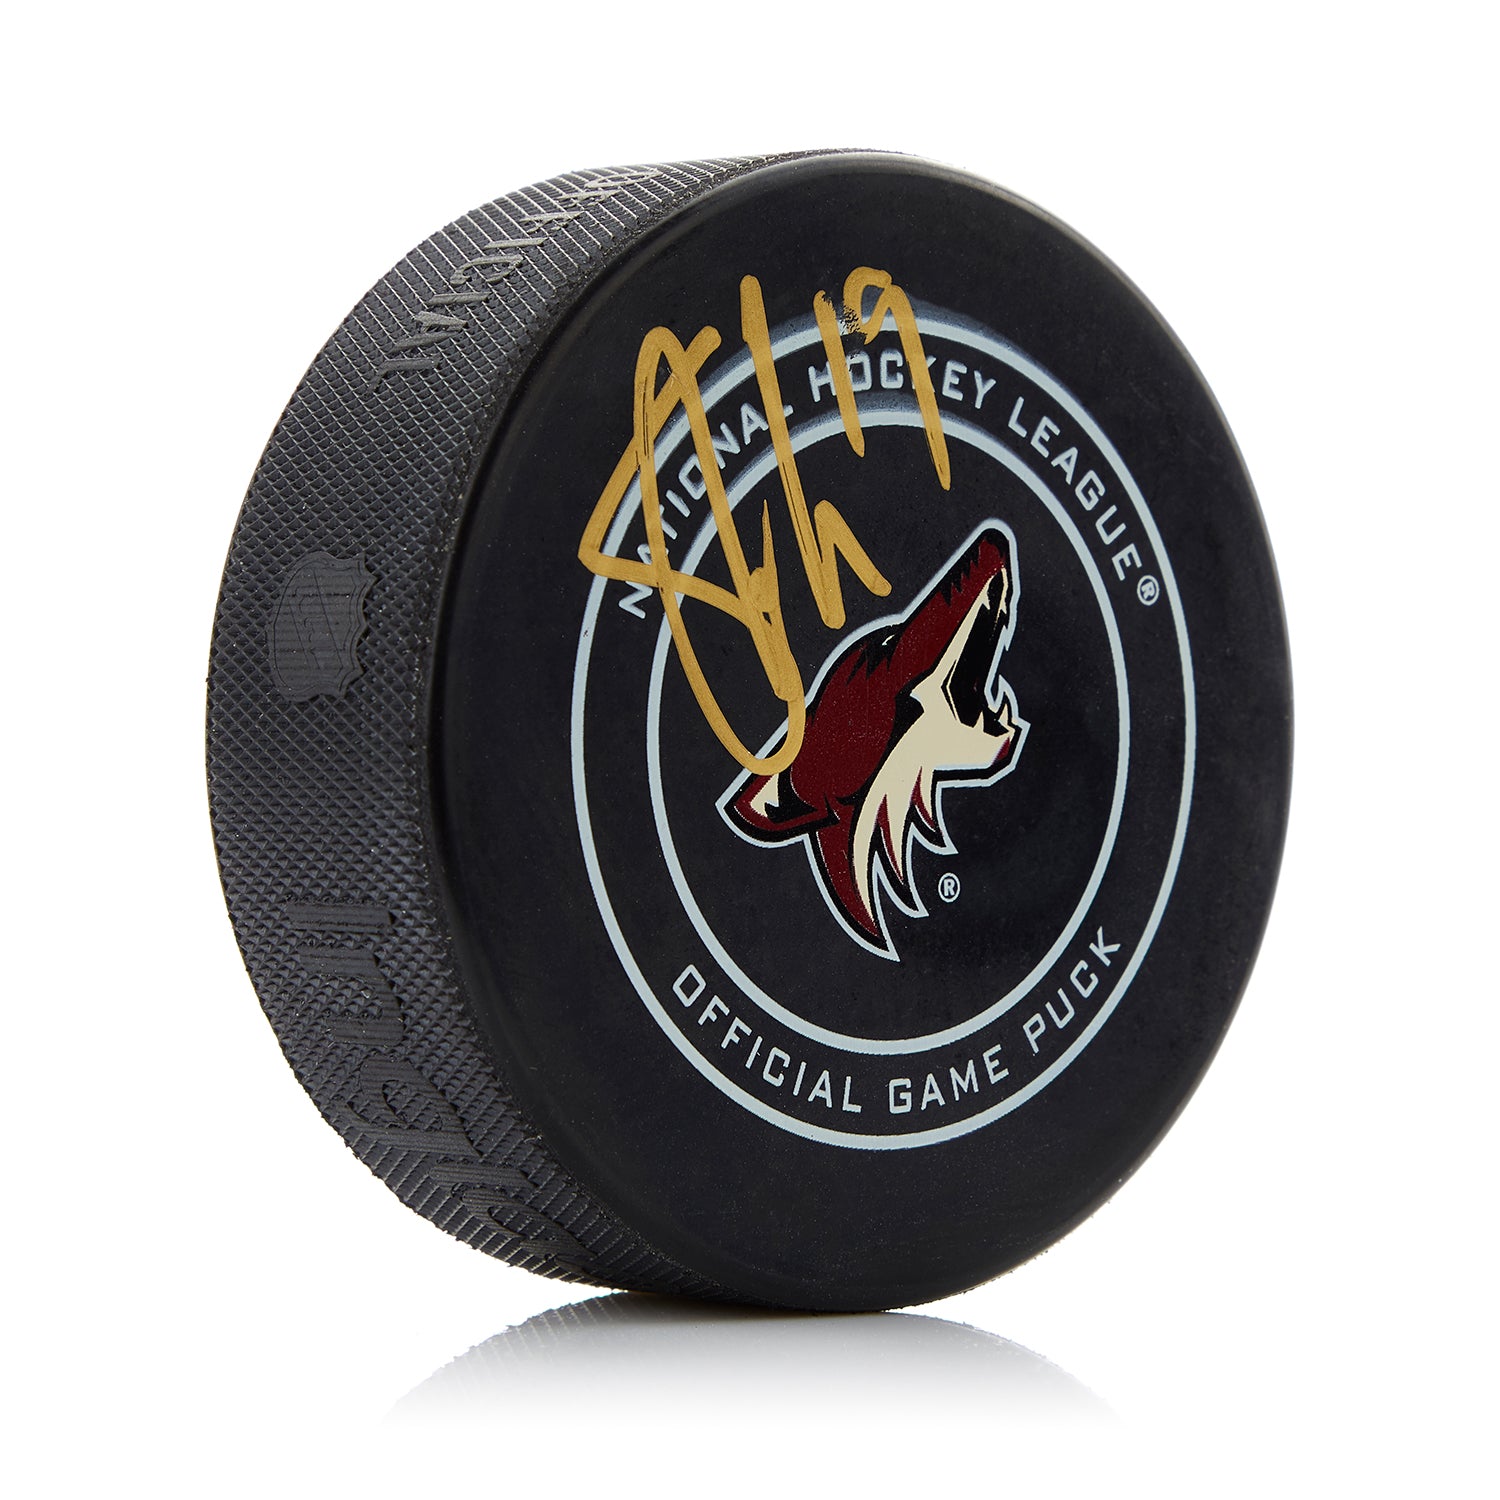 Shane Doan Arizona Coyotes Autographed Official Game Puck